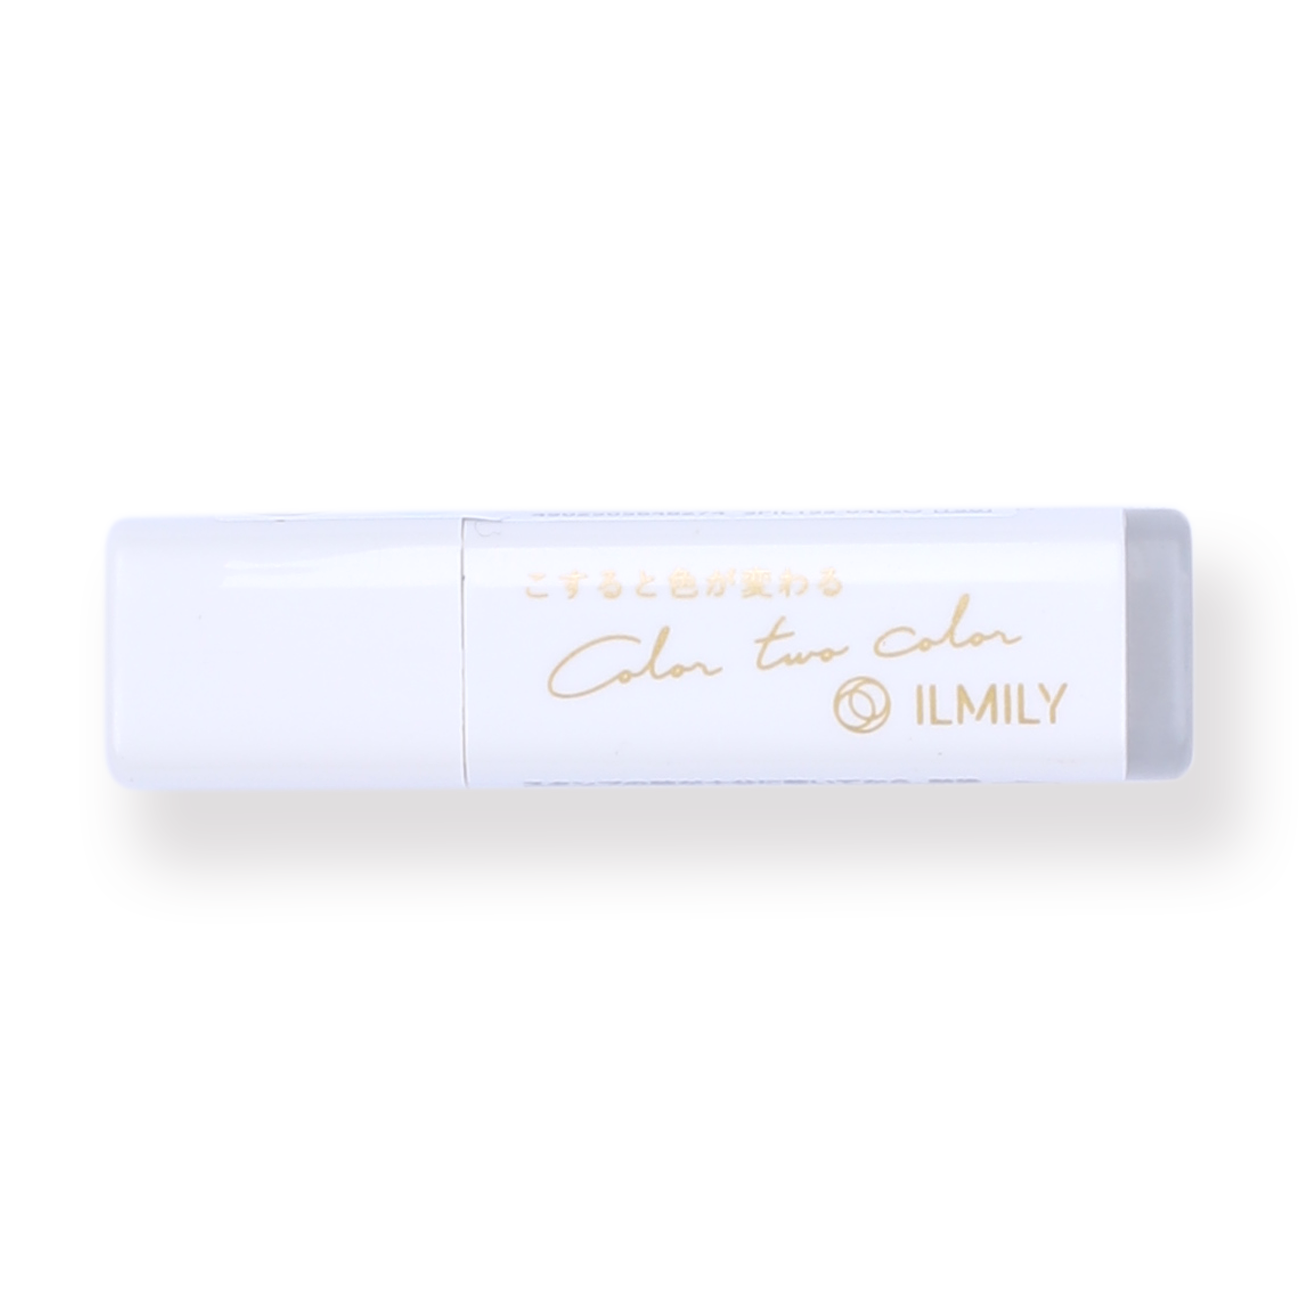 Pilot ILMILY Limited Edition Erasable Stamp - Location - Stationery Pal